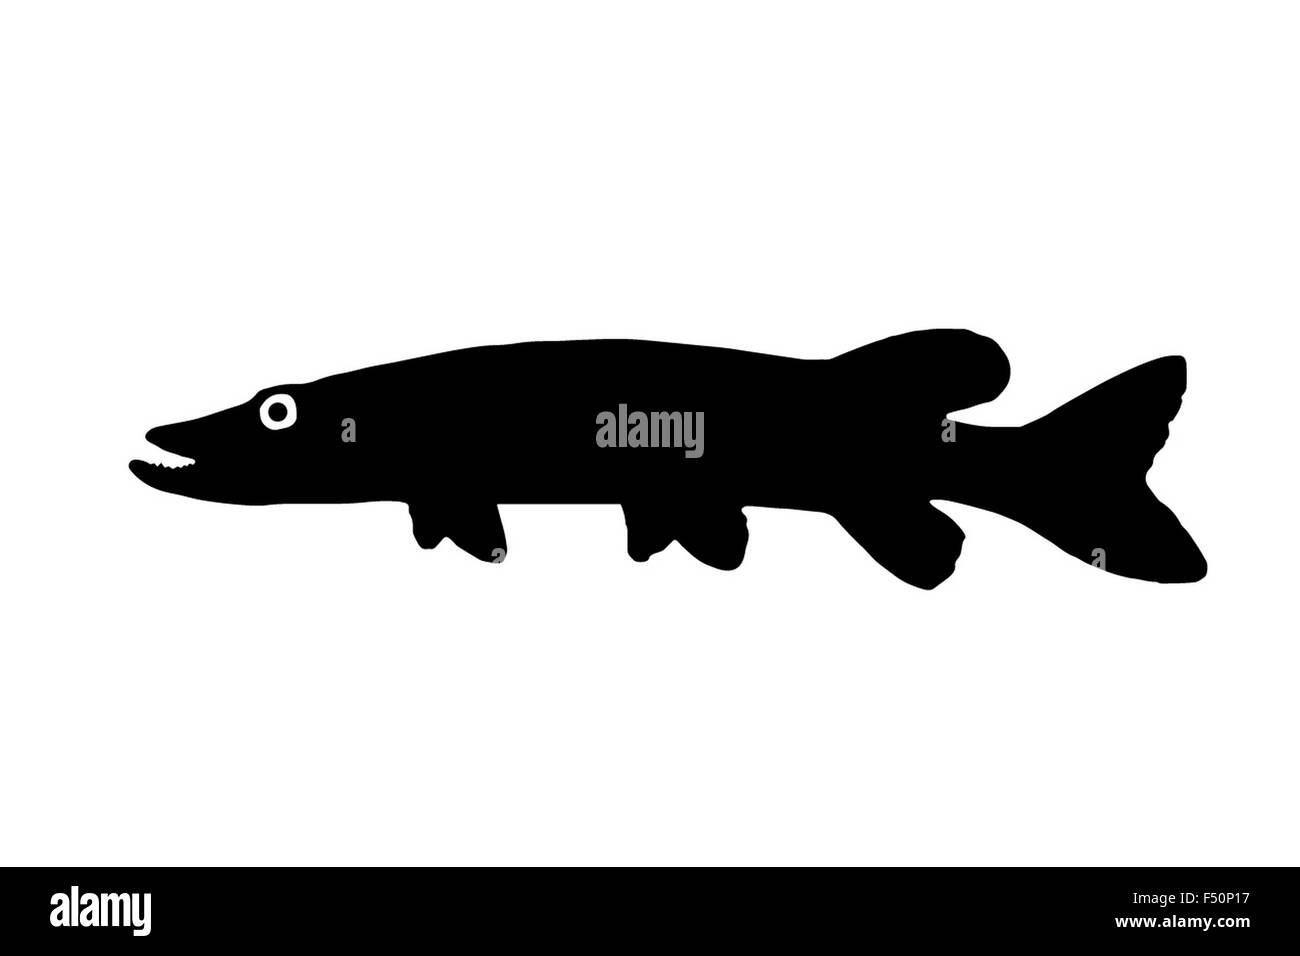 The silhouette of fish predators Pike freshwater fish that lives in clear lakes and rivers. Stock Photo